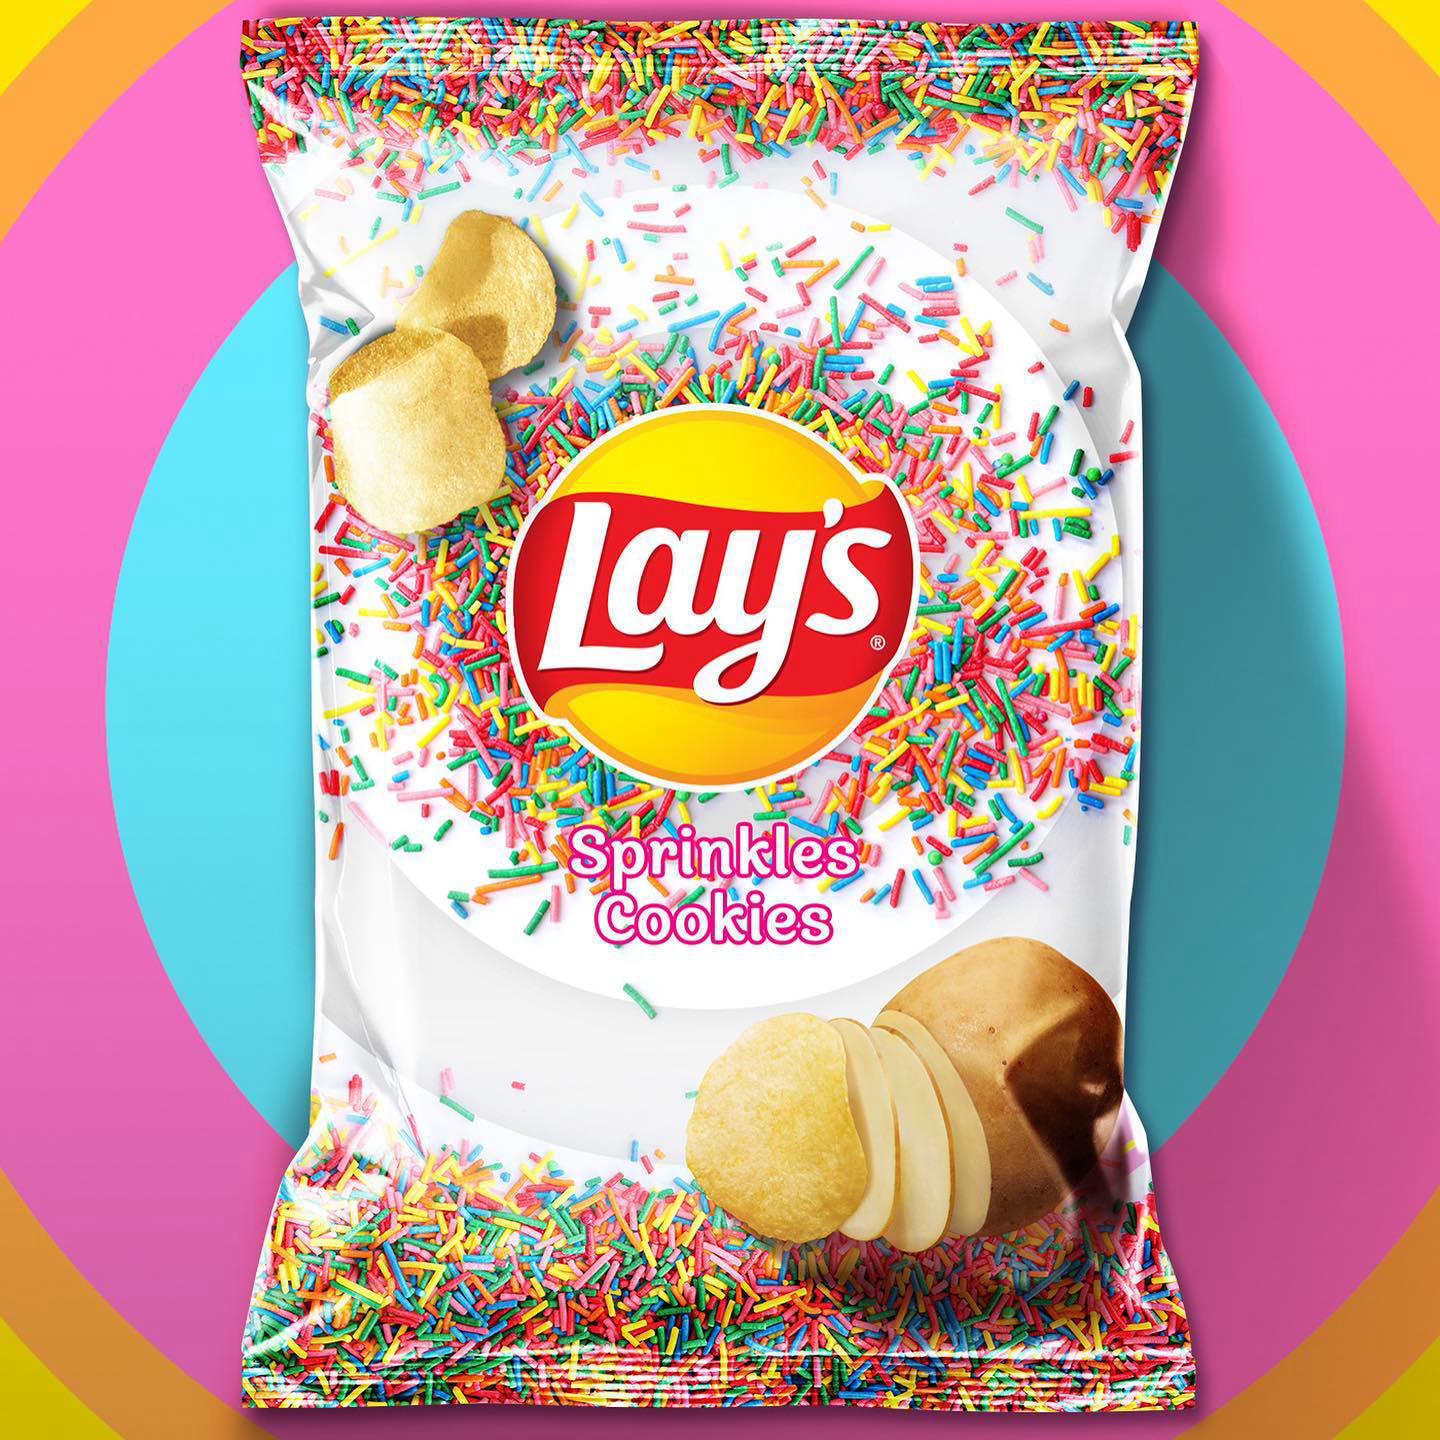 image  1 Lay's - These flavors may be fake, but things are about to get REAL *wink wink*